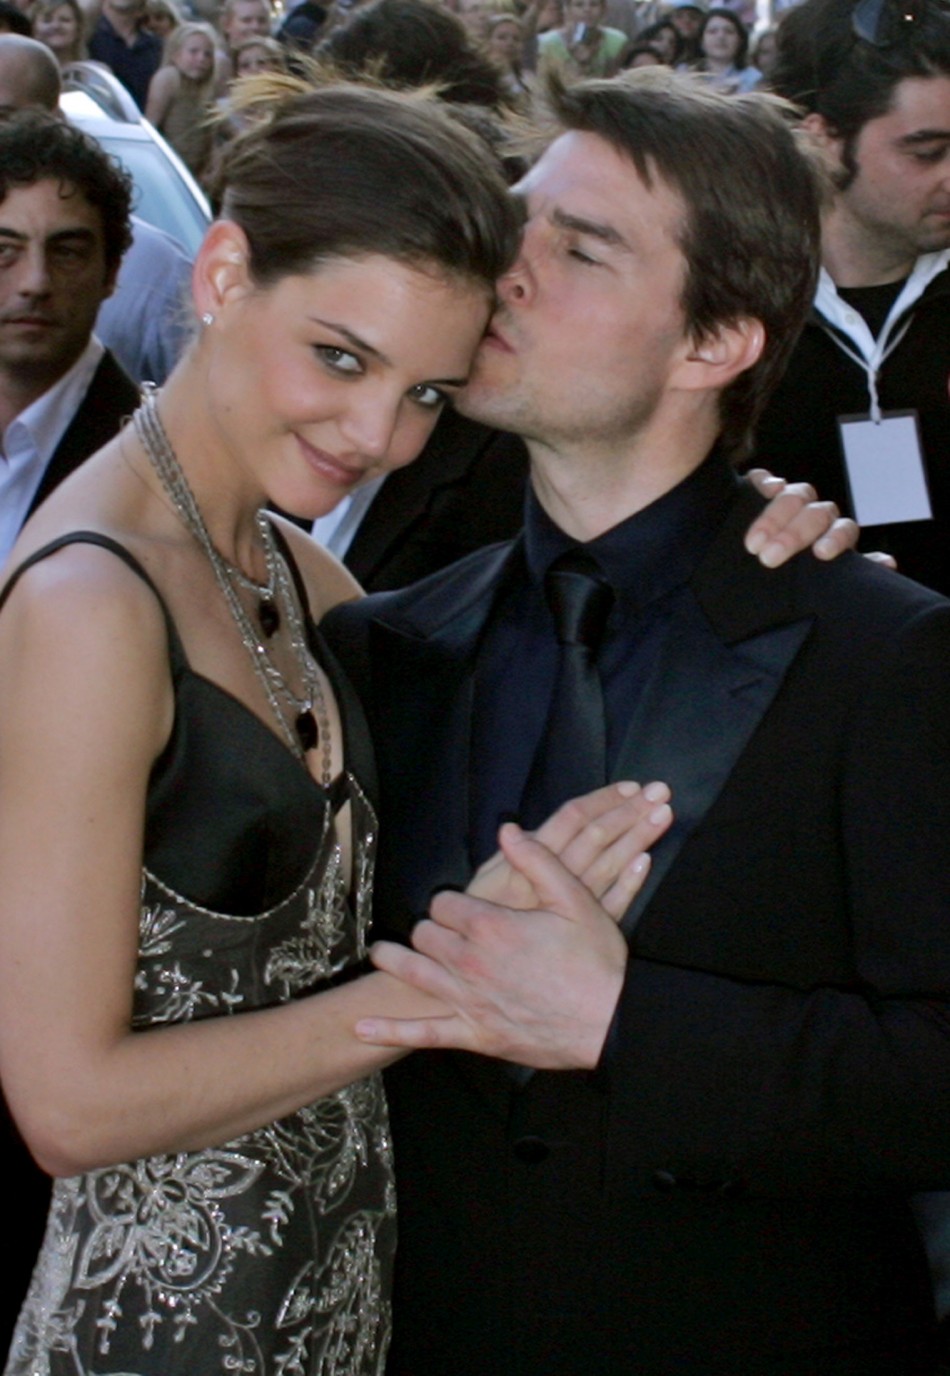 US actor Tom Cruise arrives for awards ceremony with new girlfriend US actress Katie Holmes in Rome